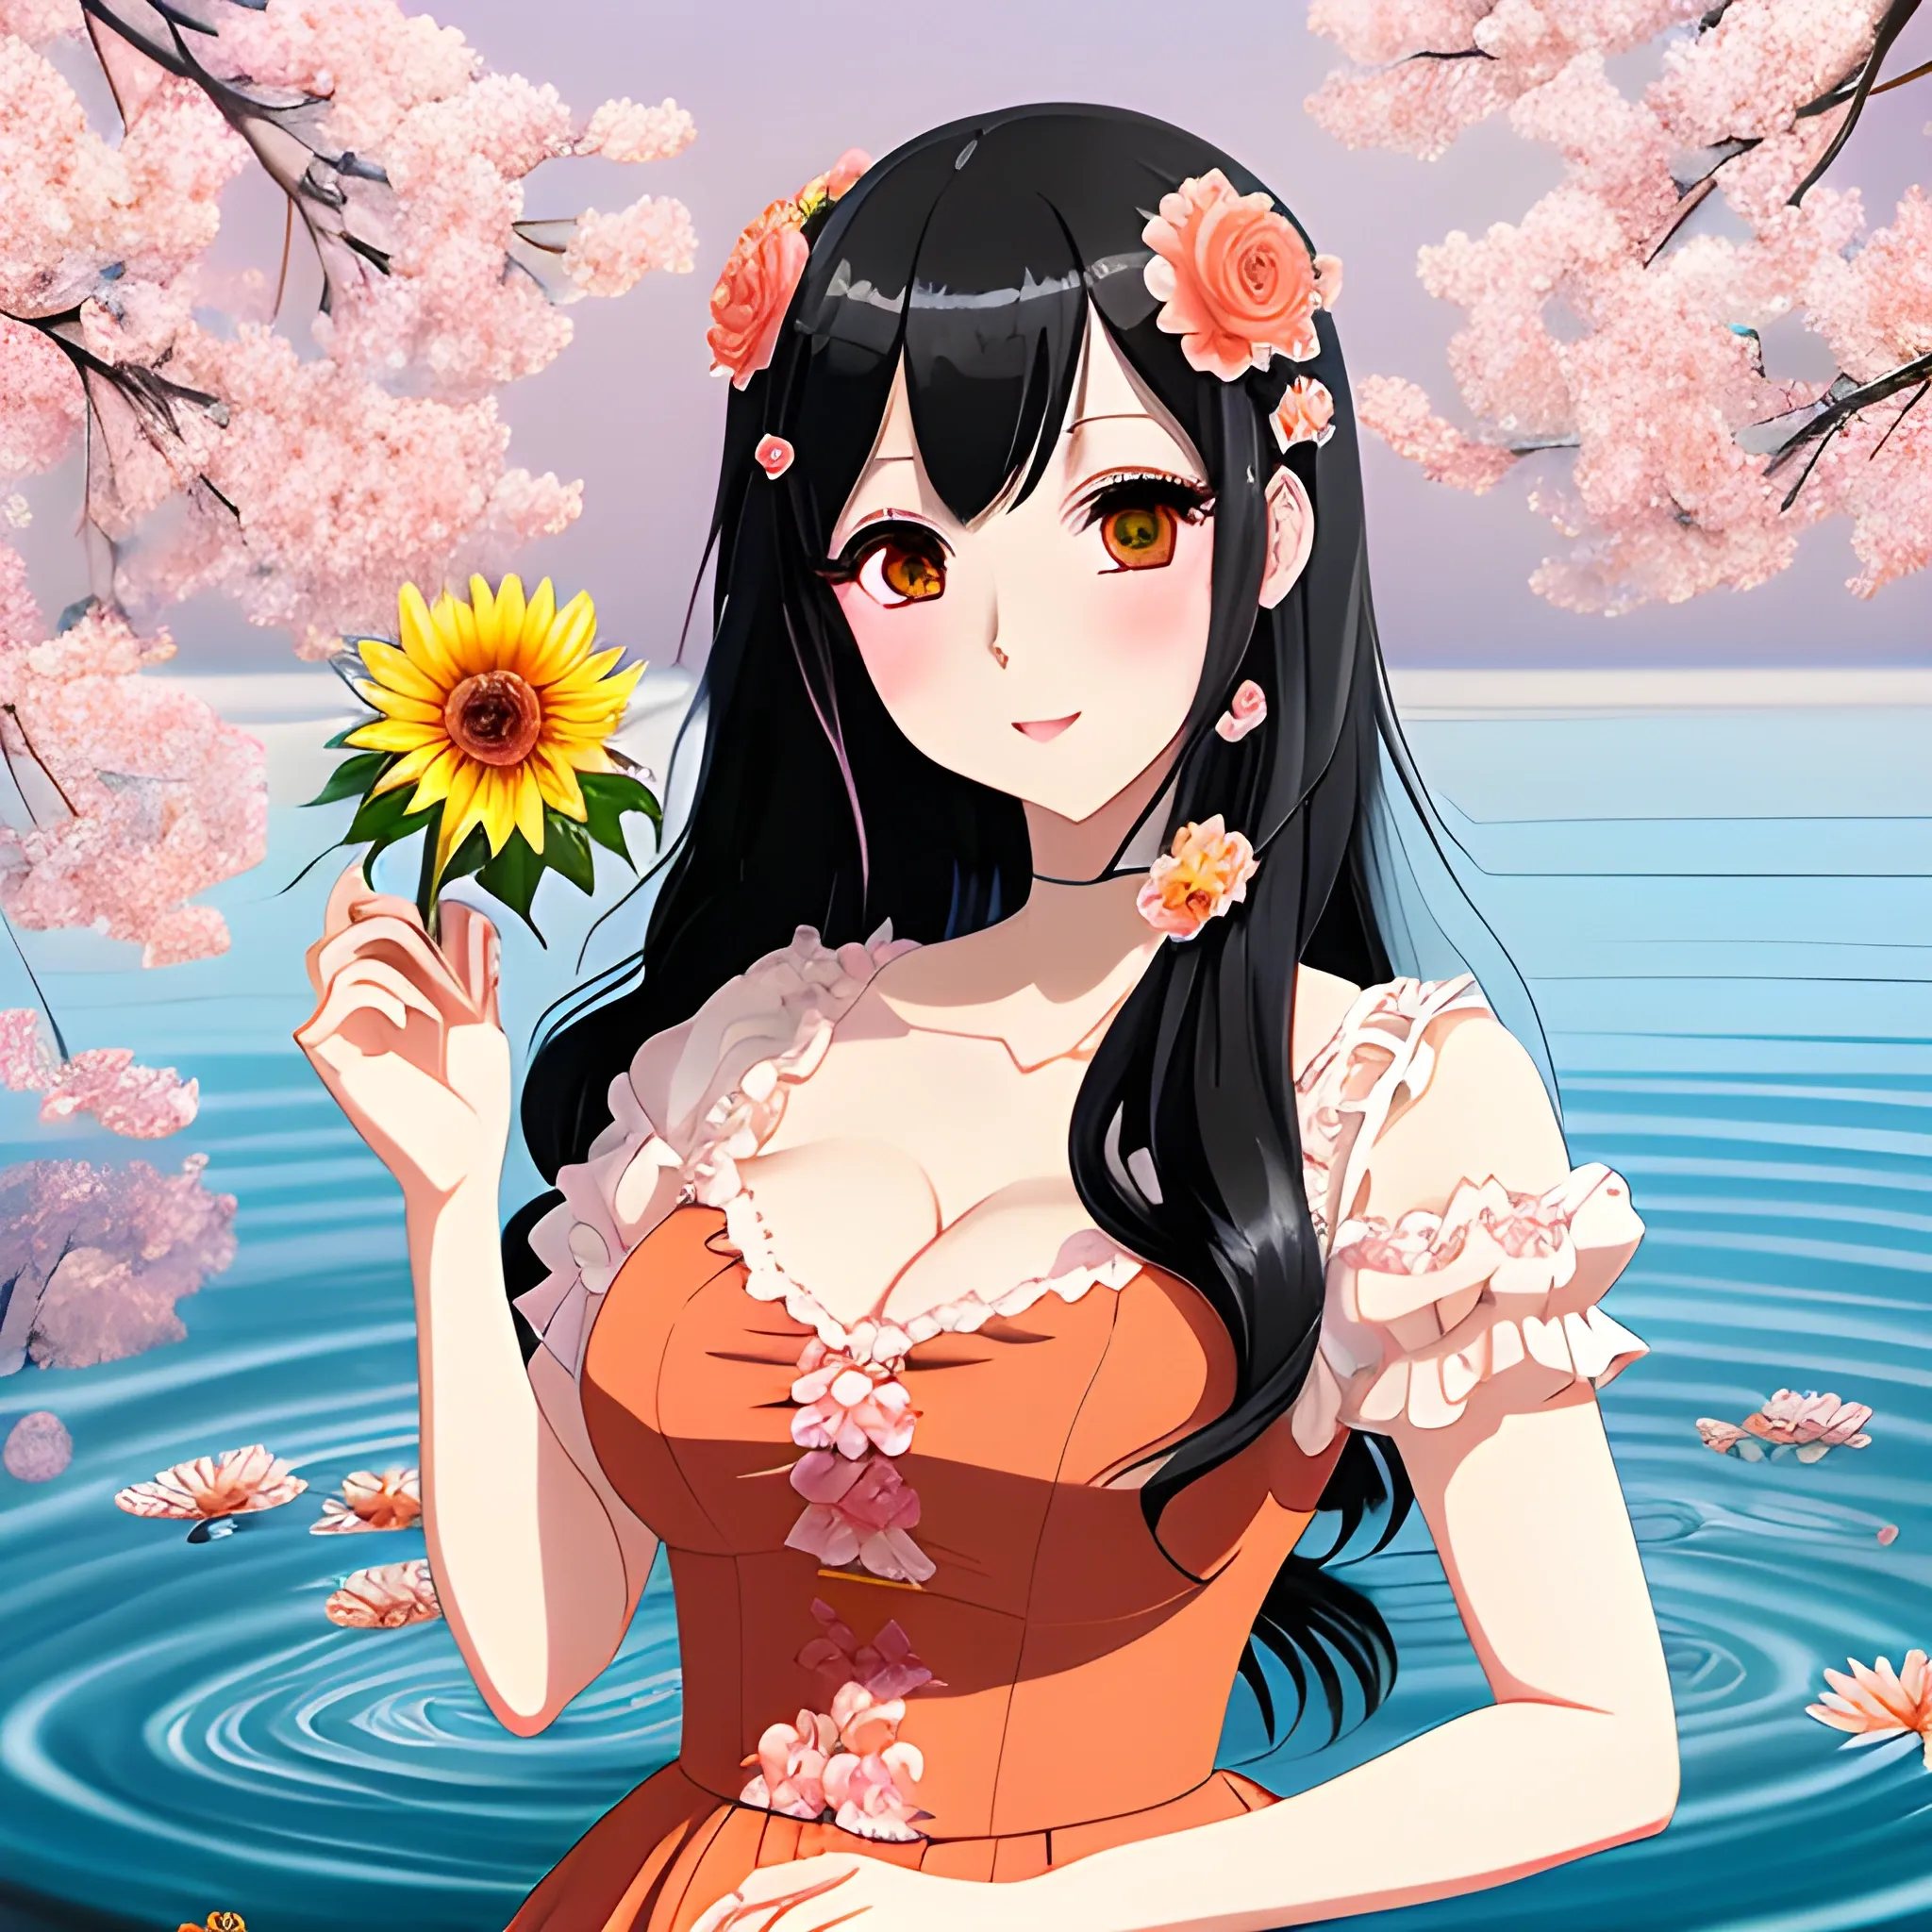 , Anime Key Visua lBlack-haired woman, curved face, with rosy cheeks, big black eyes, thick eyelashes, thick lips, peach color, thick eyebrows, upturned nose, lying on dark water, holding a sunflower, a rose, a jasmine, a flower cherry tree, a white lotus, wearing a red lace dress.